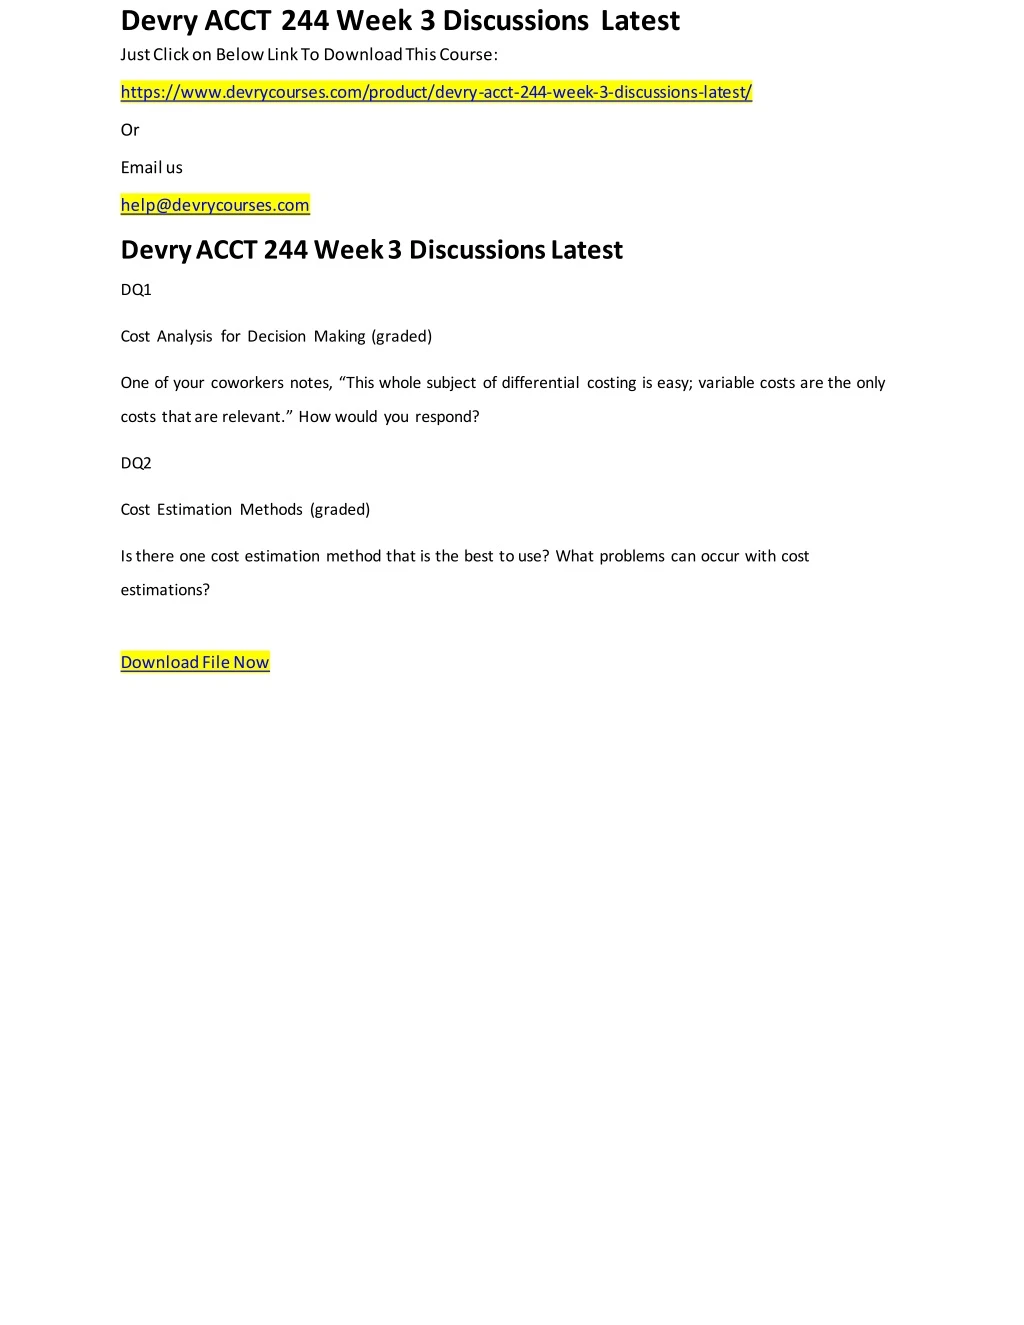 devry acct 244 week 3 discussions latest just